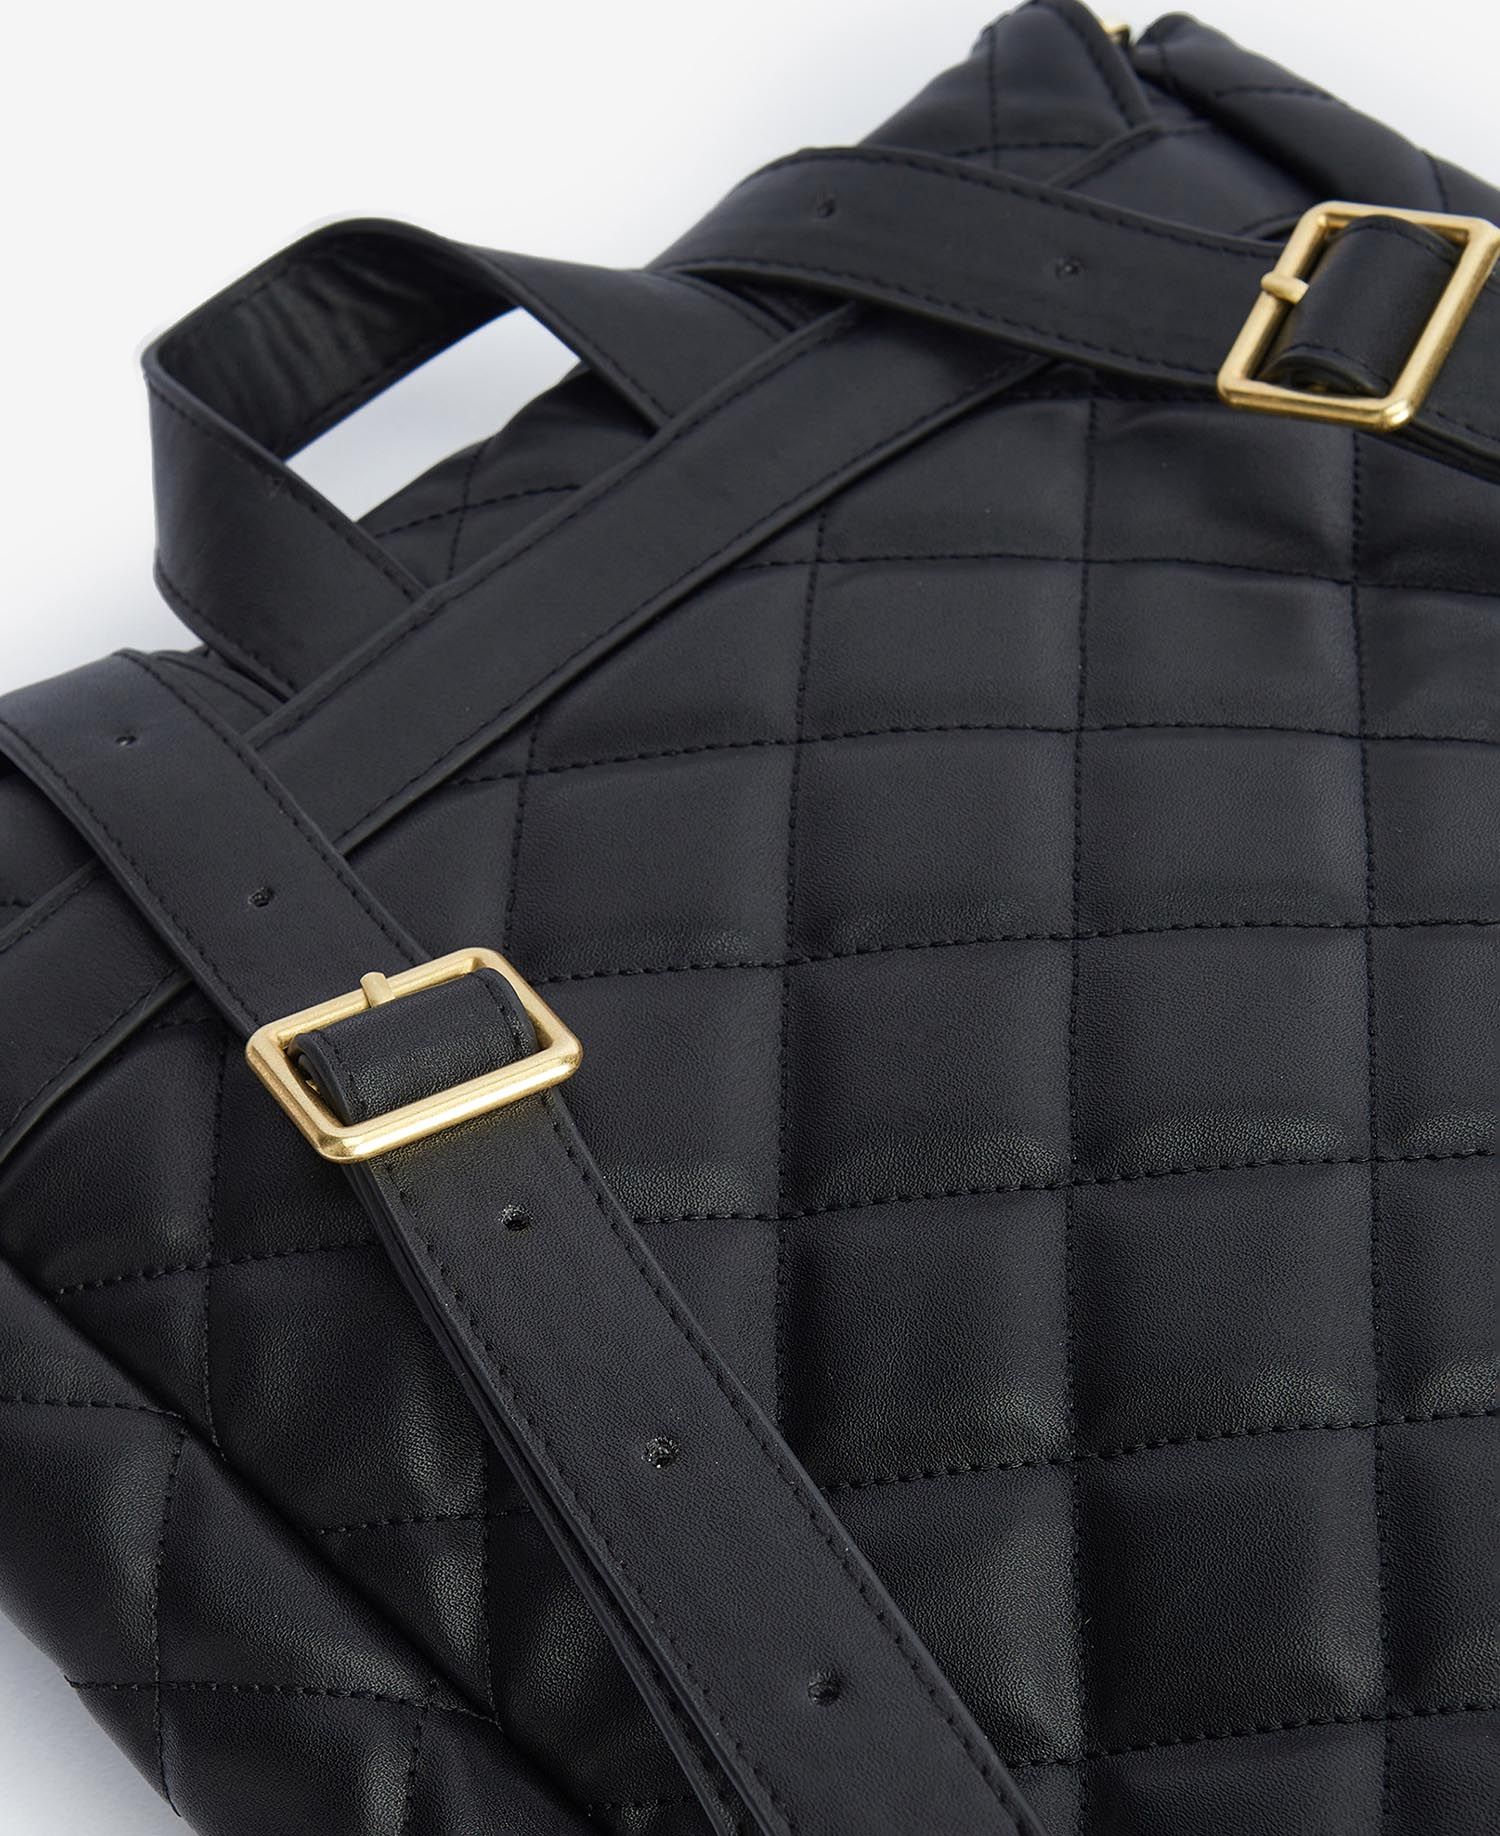 Barbour International Quilted Hoxton Backpack